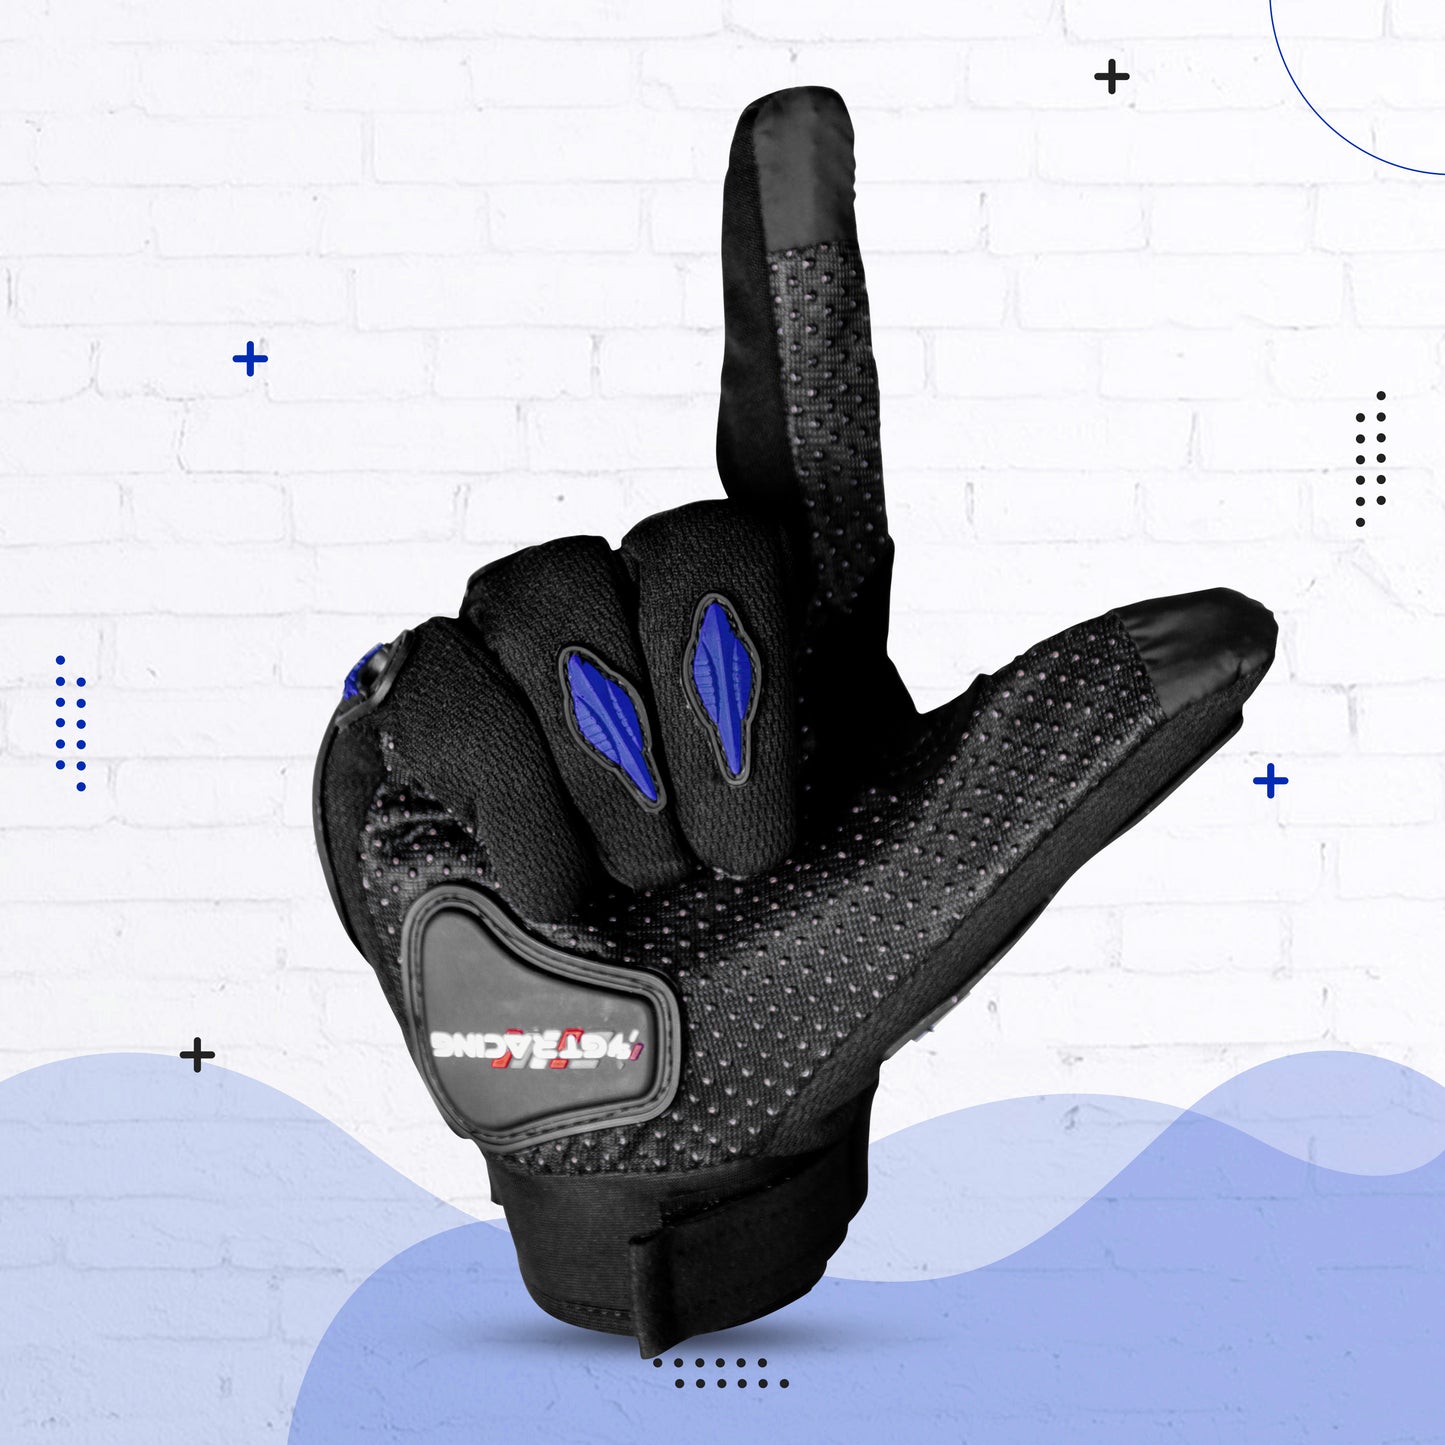 Steelbird Experience 1.0 Reflective Full Finger Bike Riding Gloves with Touch Screen Sensitivity at Thumb and Index Finger, Protective Off-Road Motorbike Racing (Black Blue)